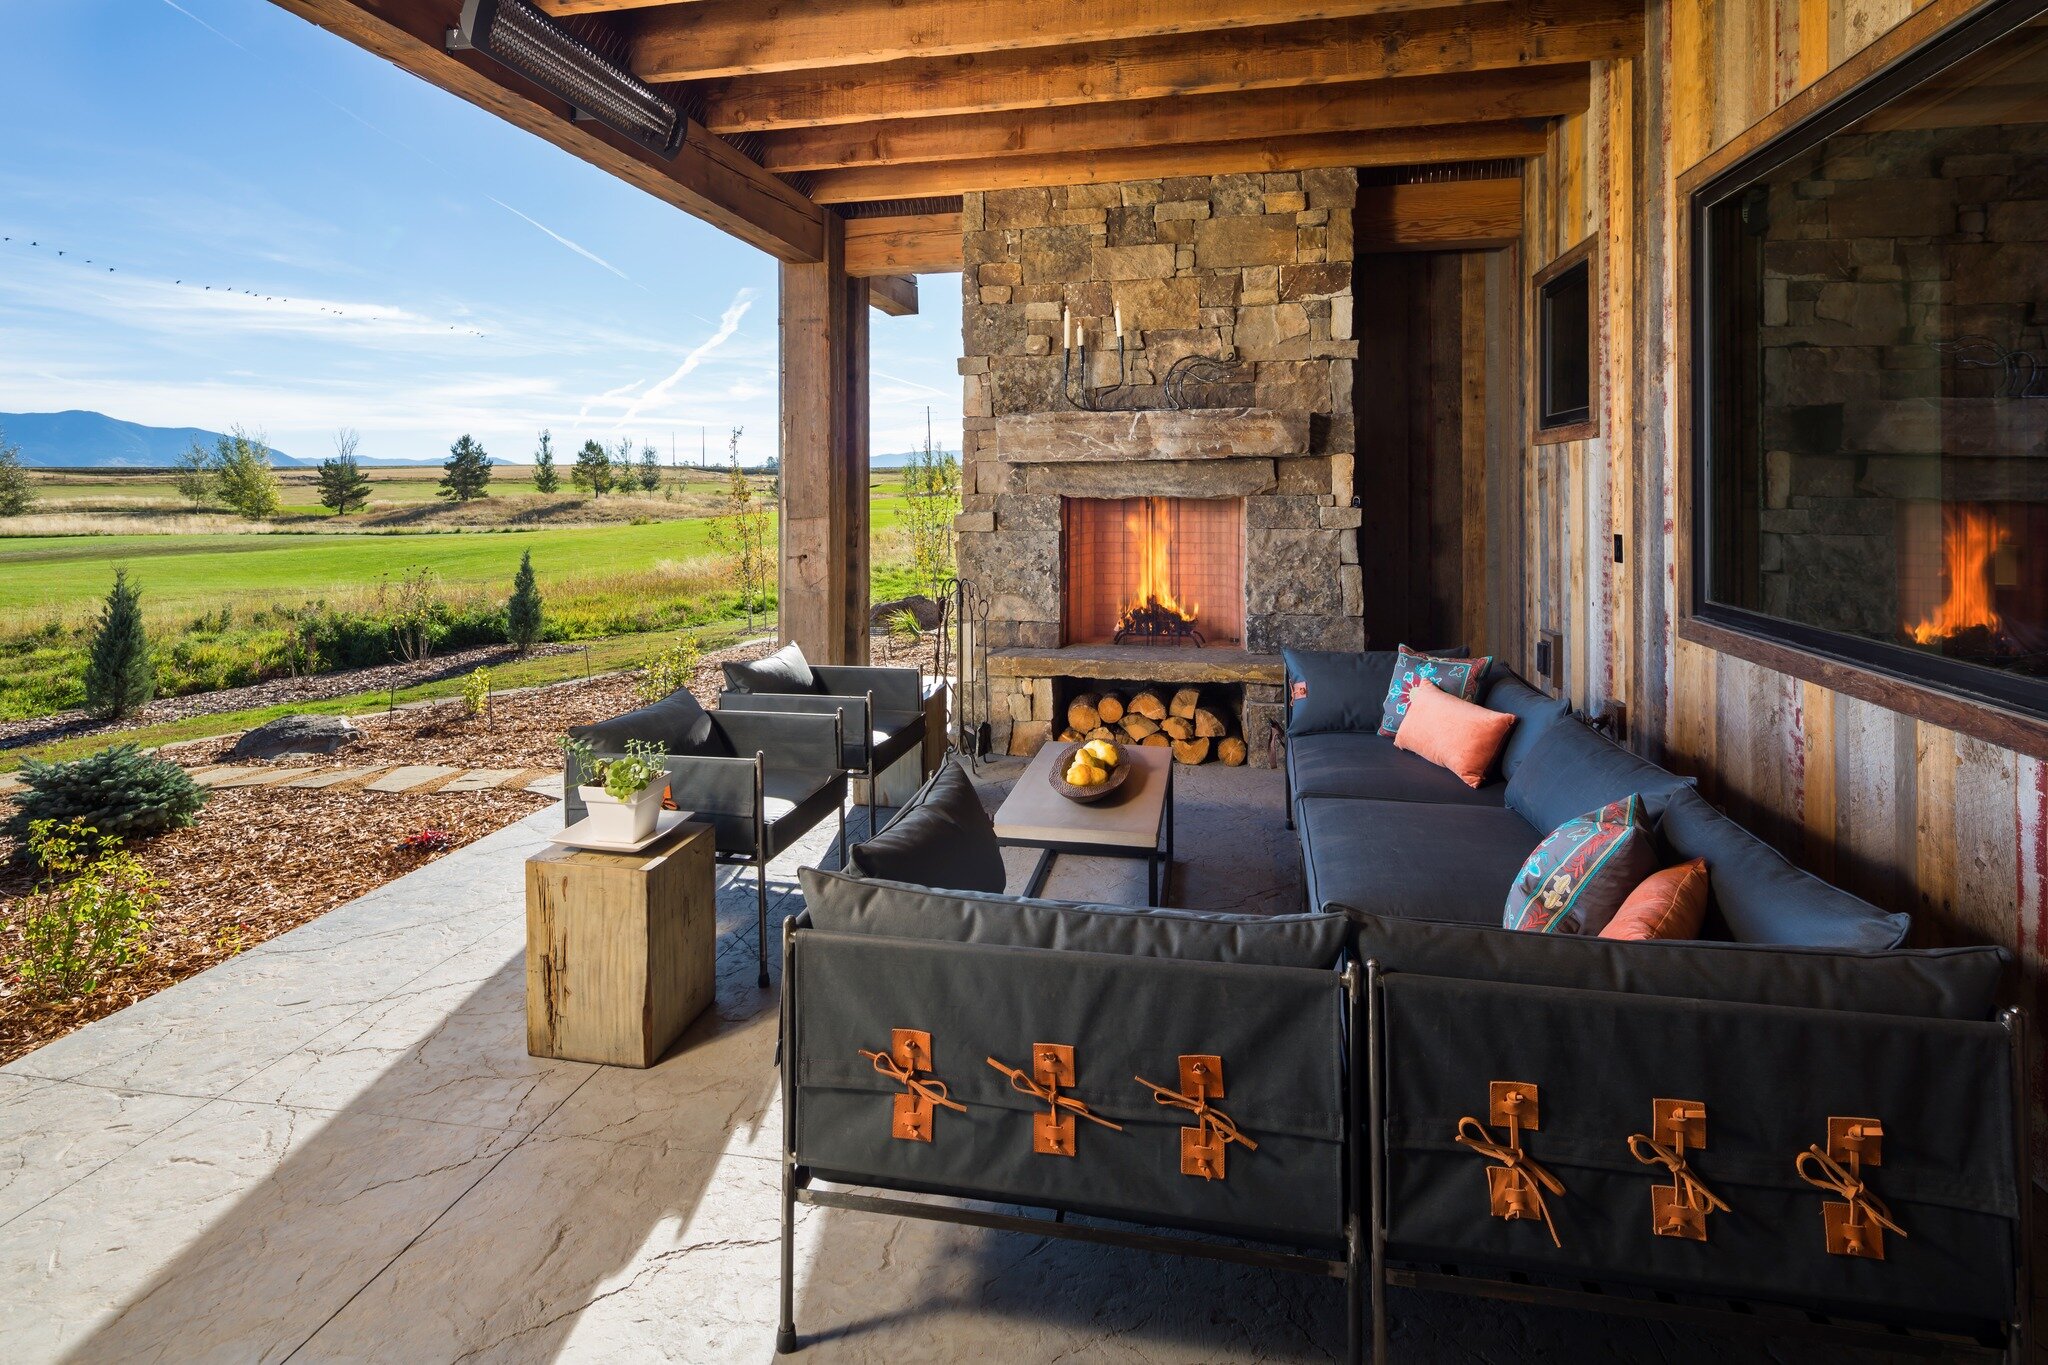 Spring has sprung and we're thrilled to share this stunning outdoor fireplace patio we designed overlooking the breathtaking Montana landscape! 

What are you most excited to do in the warmer weather?

.

#designerhomes #montanacustomhomes #montanacu